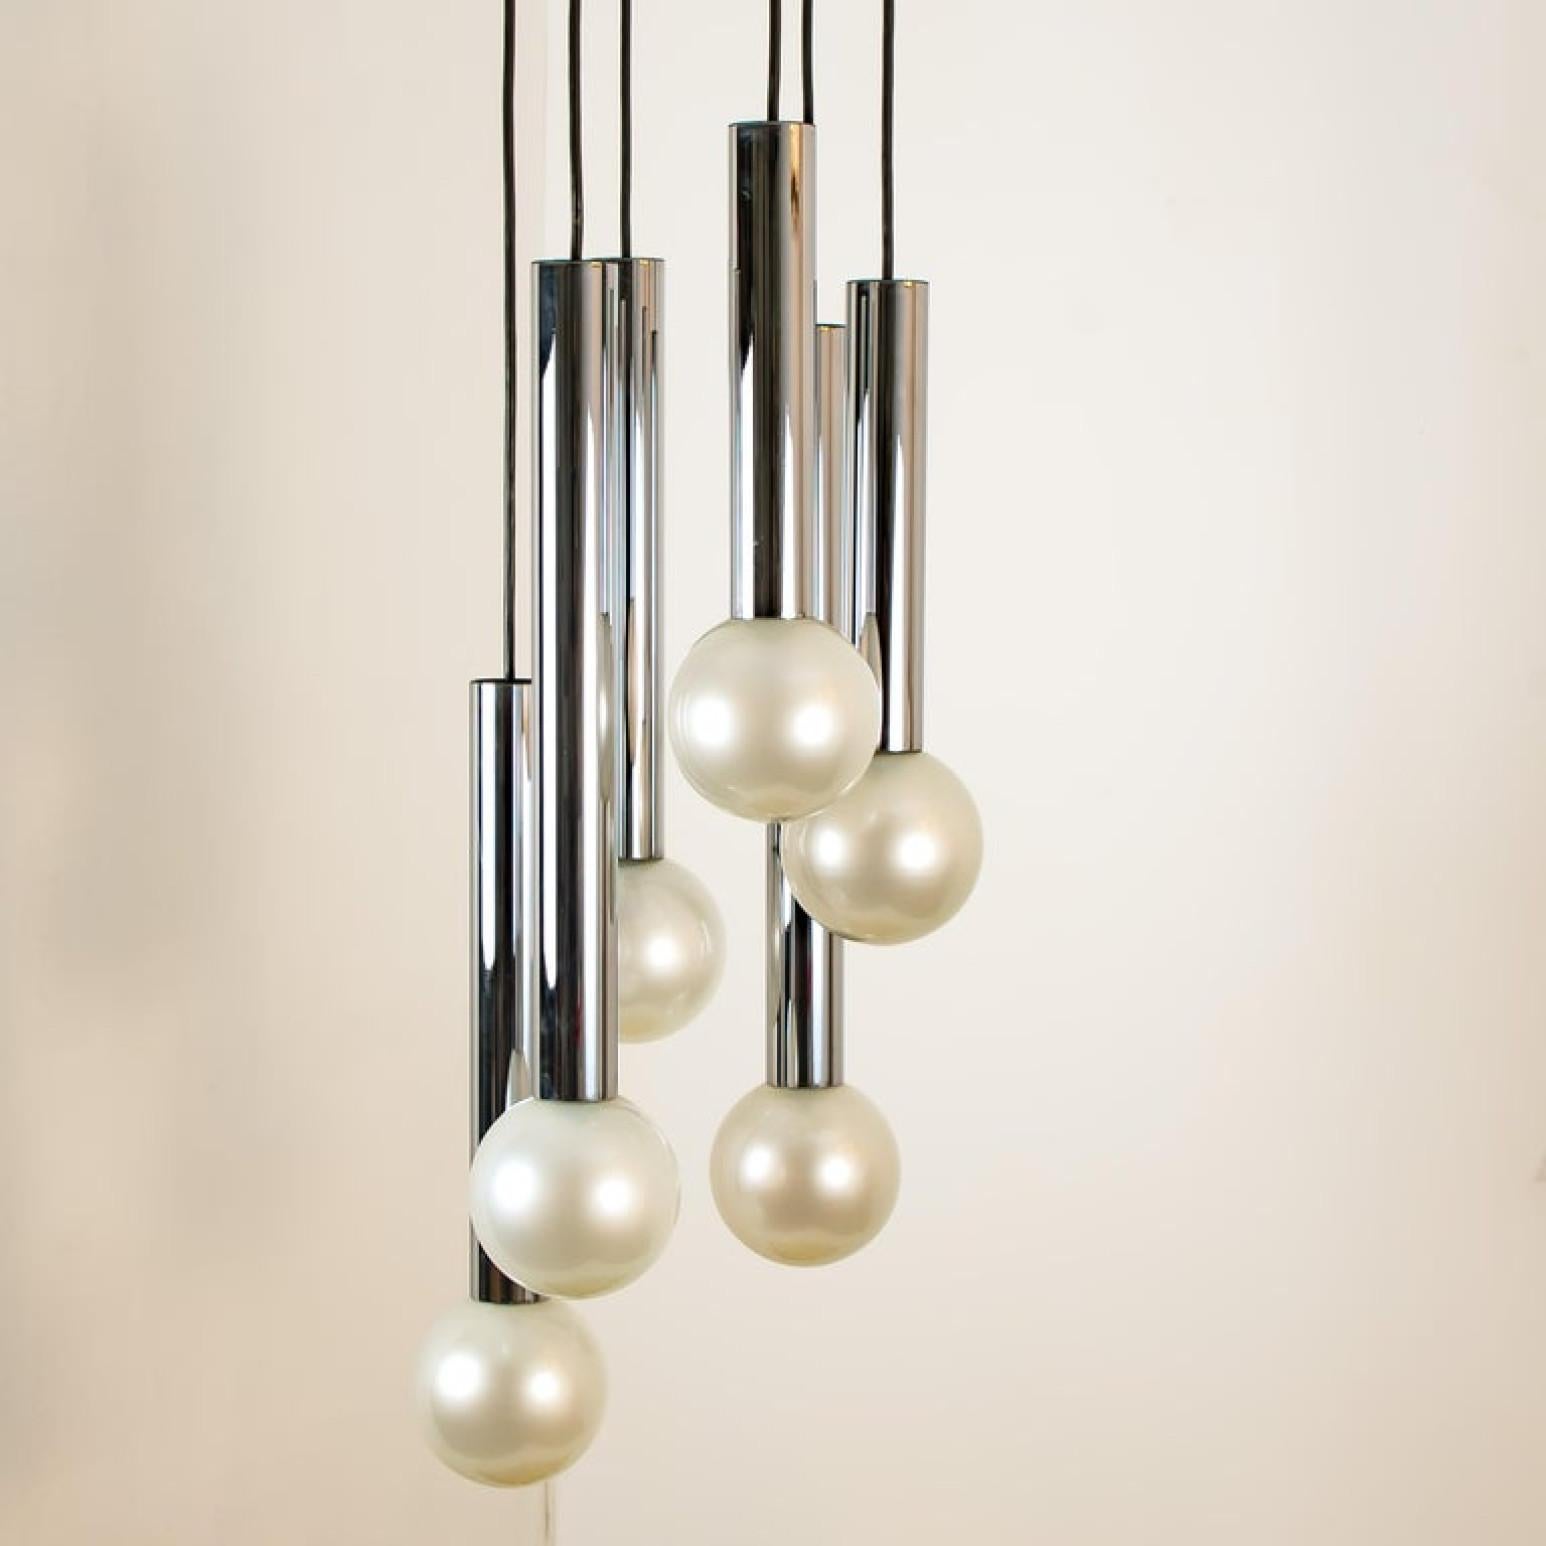 German Large Cascade Light with Blown Opaline Glass Balls by Motoko Ishii for Staff For Sale